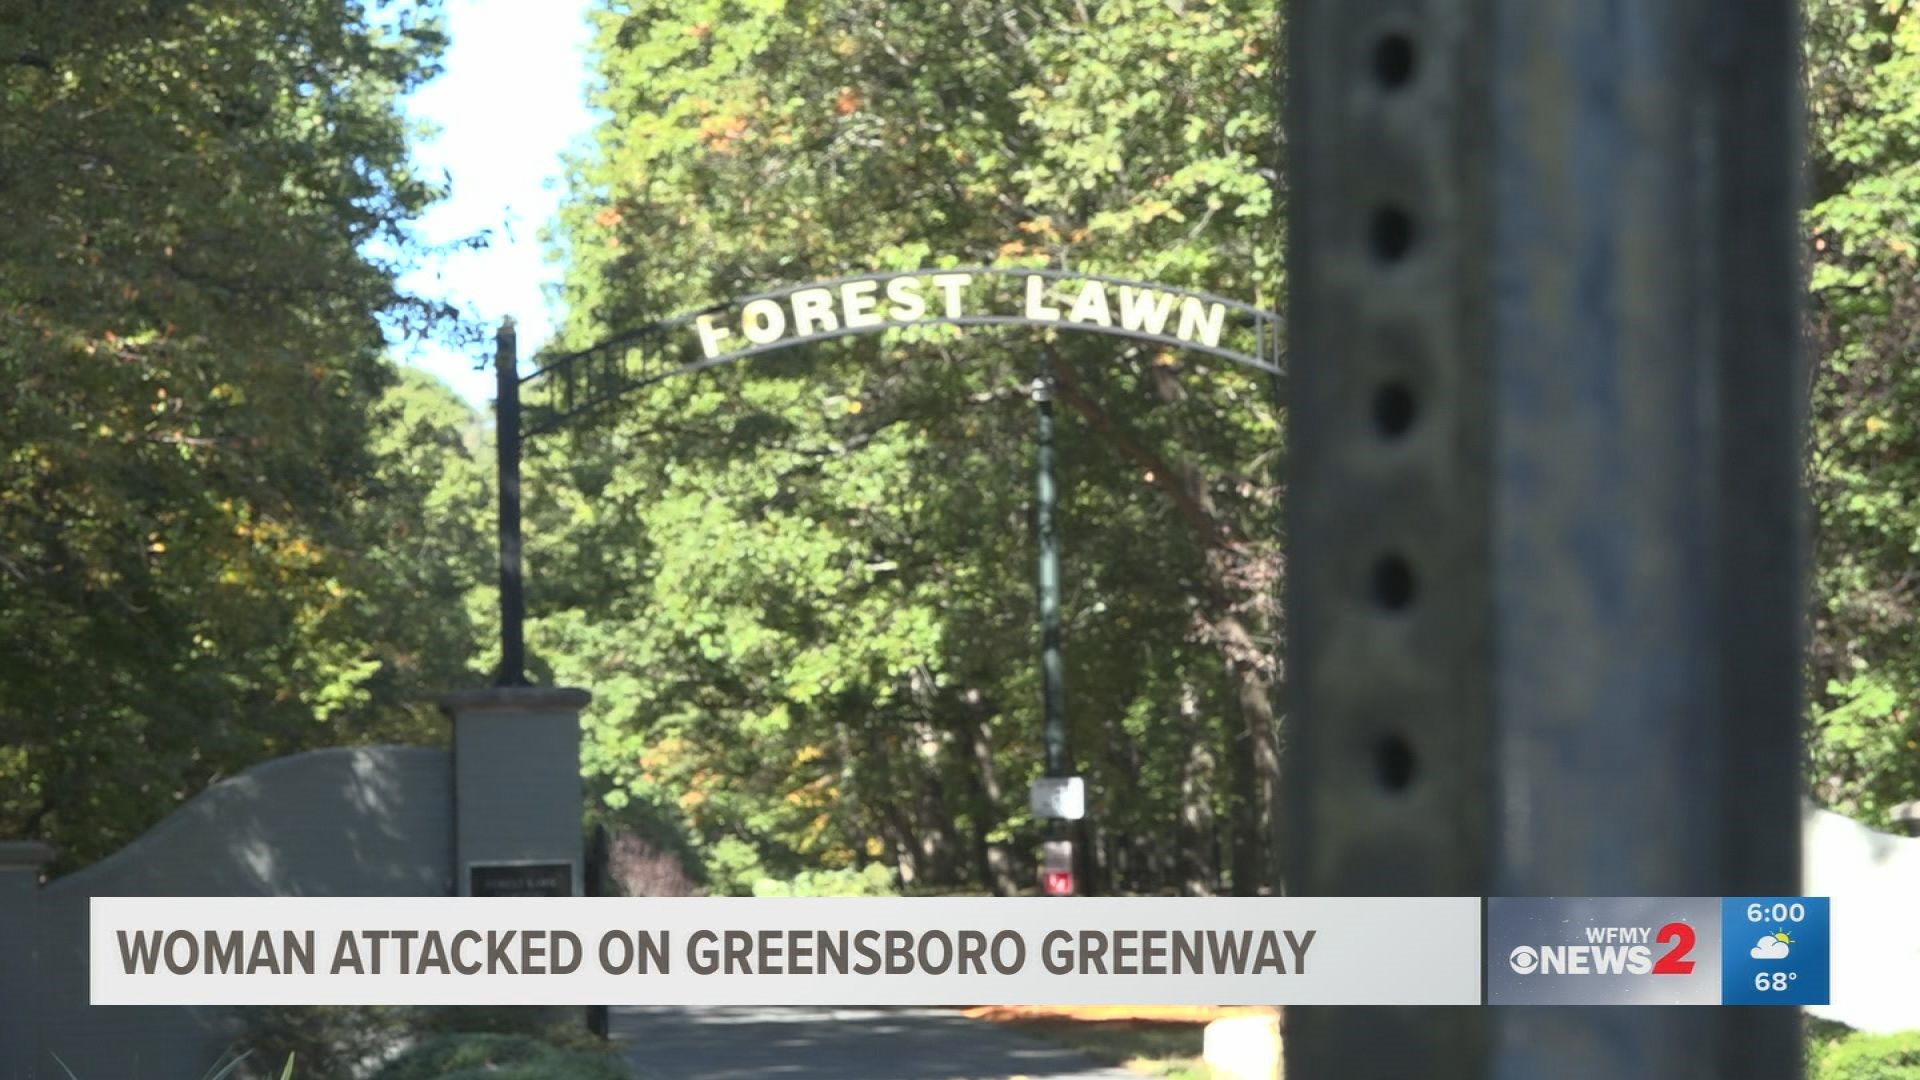 The victim says she was walking on the Greenway when a man snuck behind her and assaulted her.